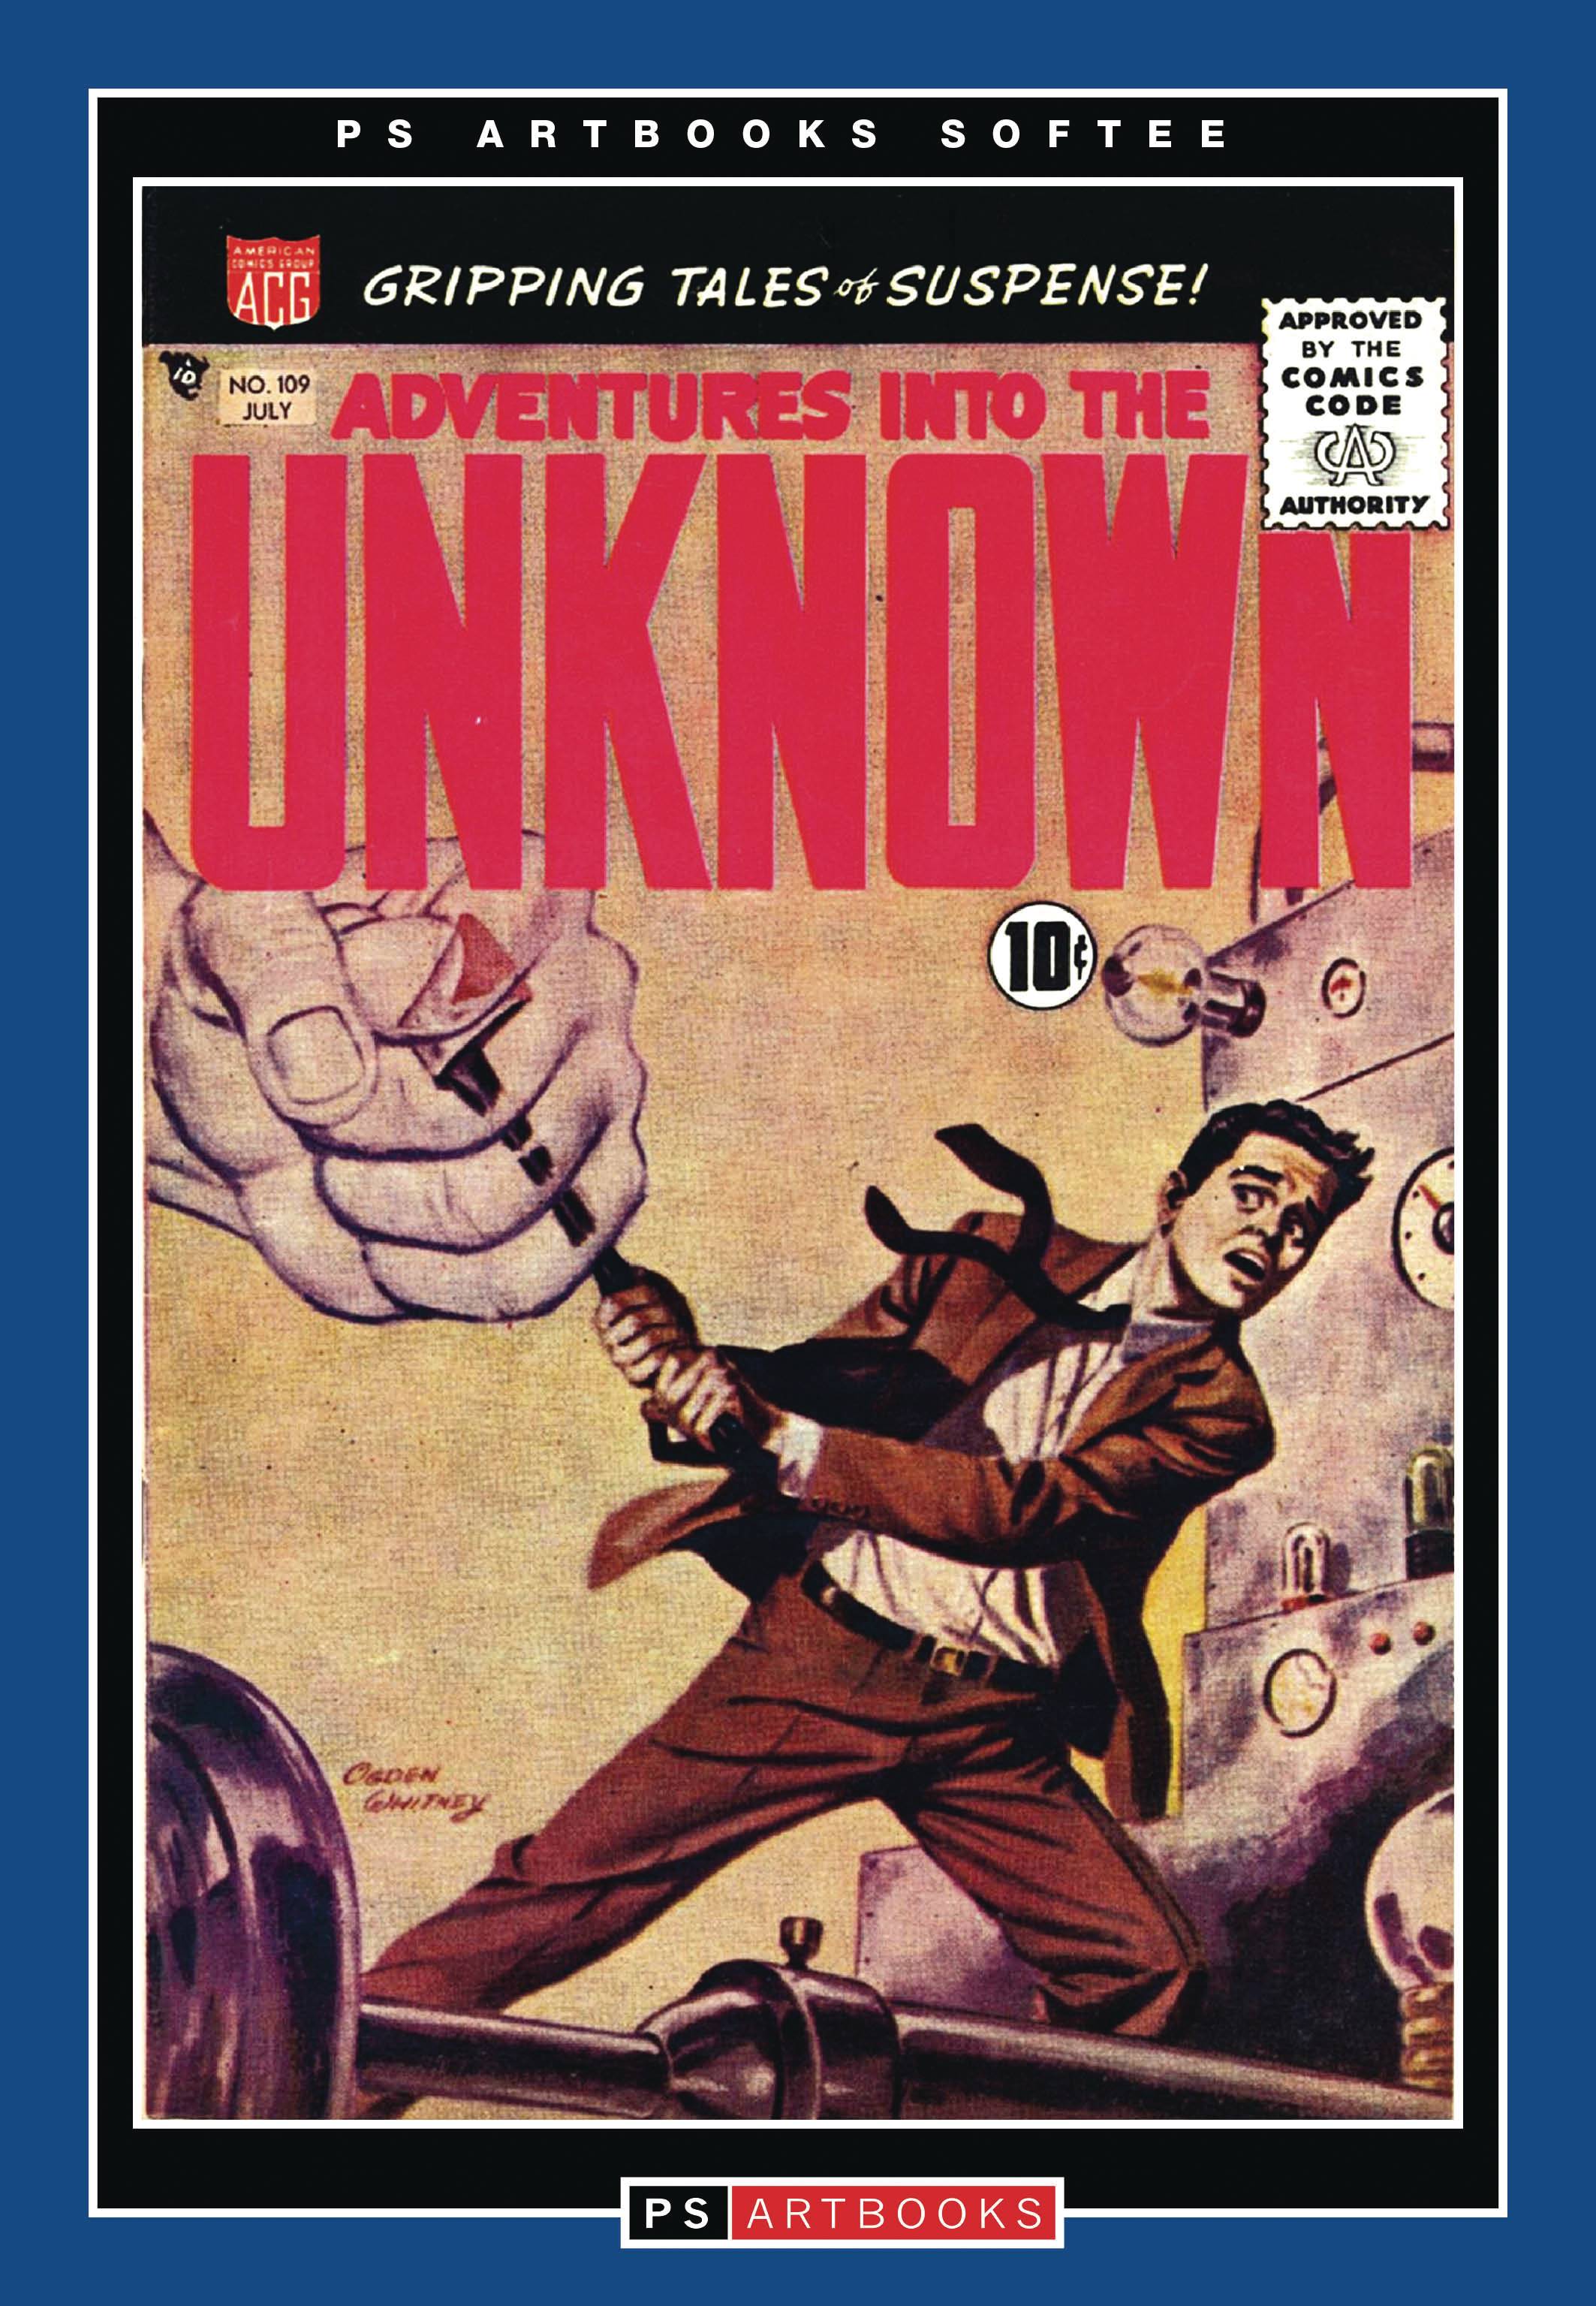 ACG COLL WORKS ADV INTO UNKNOWN SOFTEE VOL 19